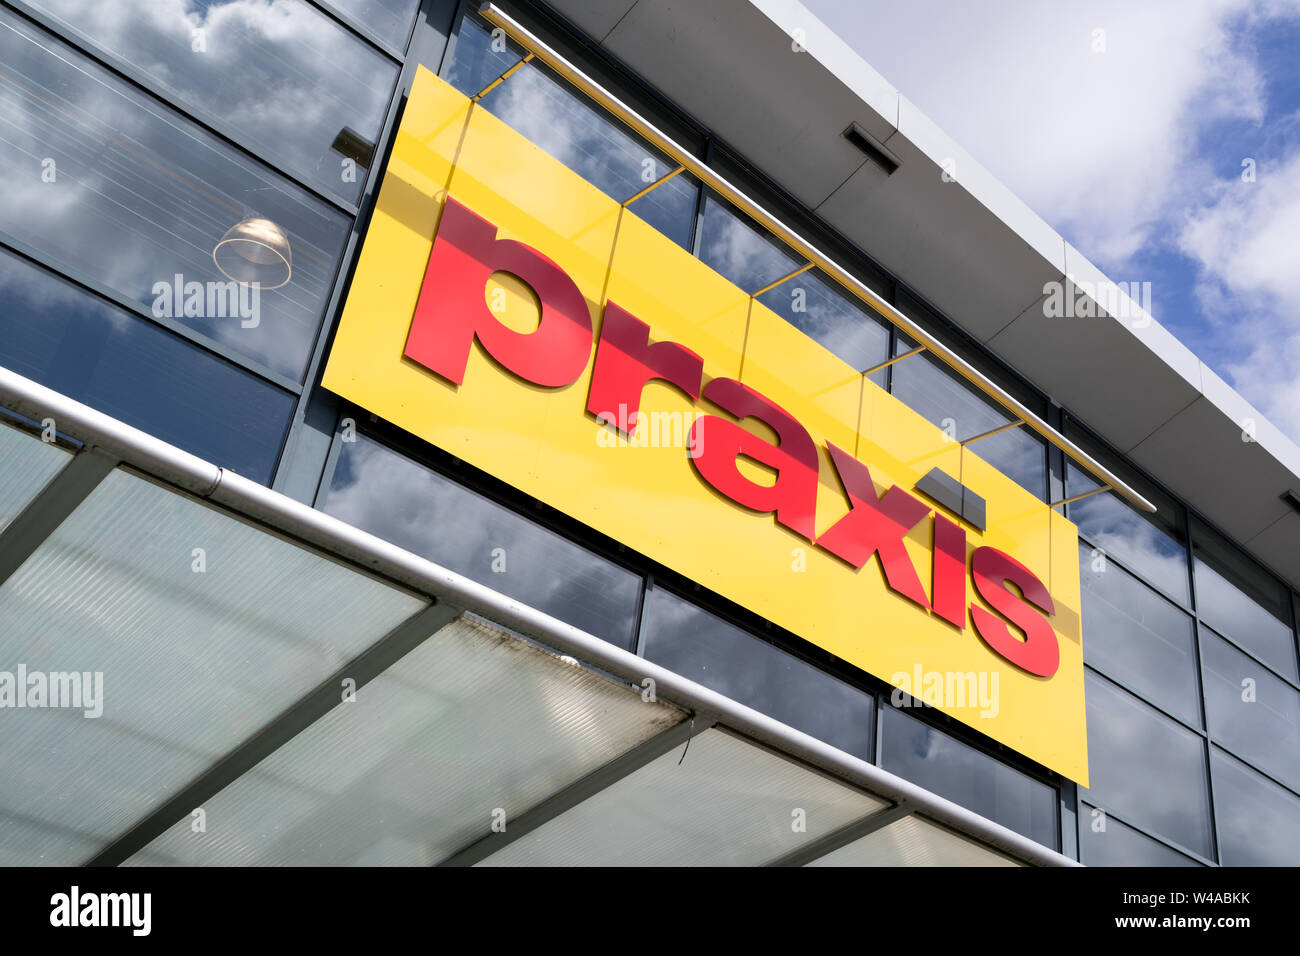 Praxis sign at branch. Praxis is a leading DIY brand in the Netherlands and has about 150 stores. Praxis is part of the Maxeda DIY Group. Stock Photo